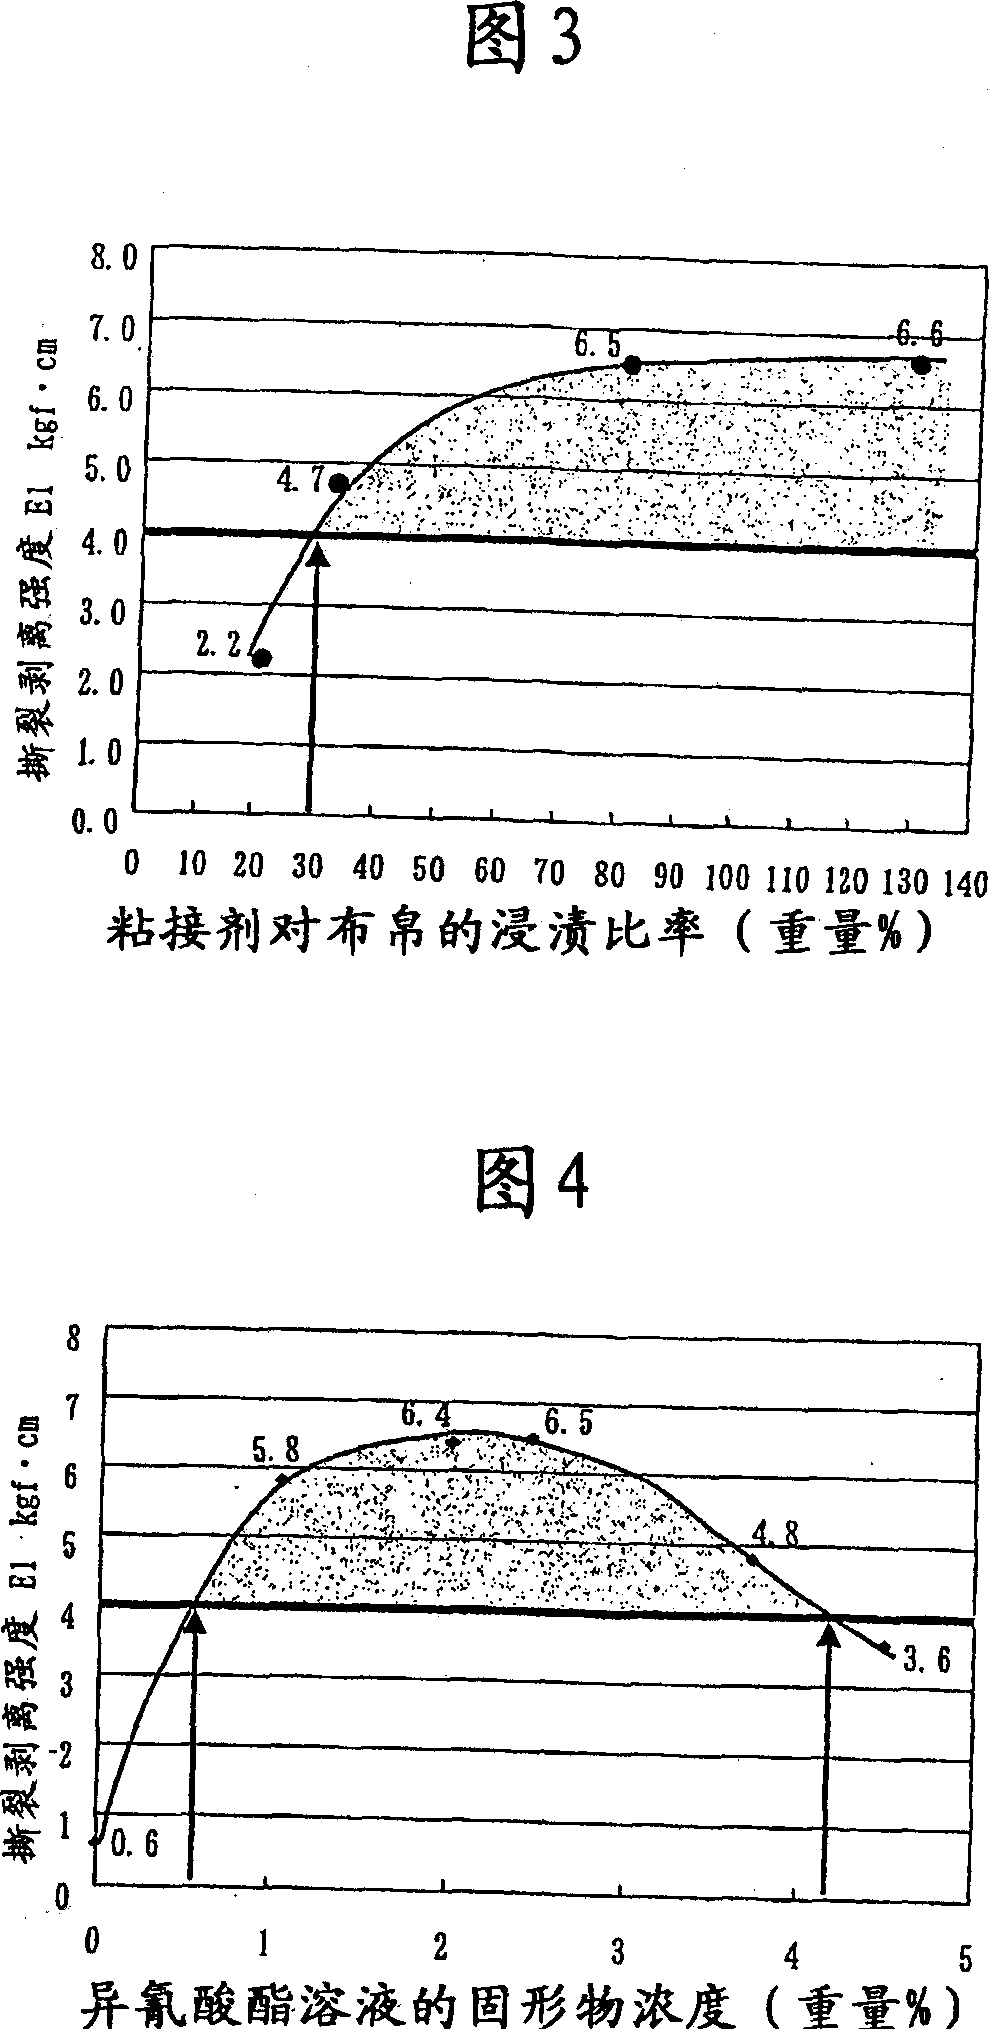 Fabric-vulcanized rubber composite and process for production thereof